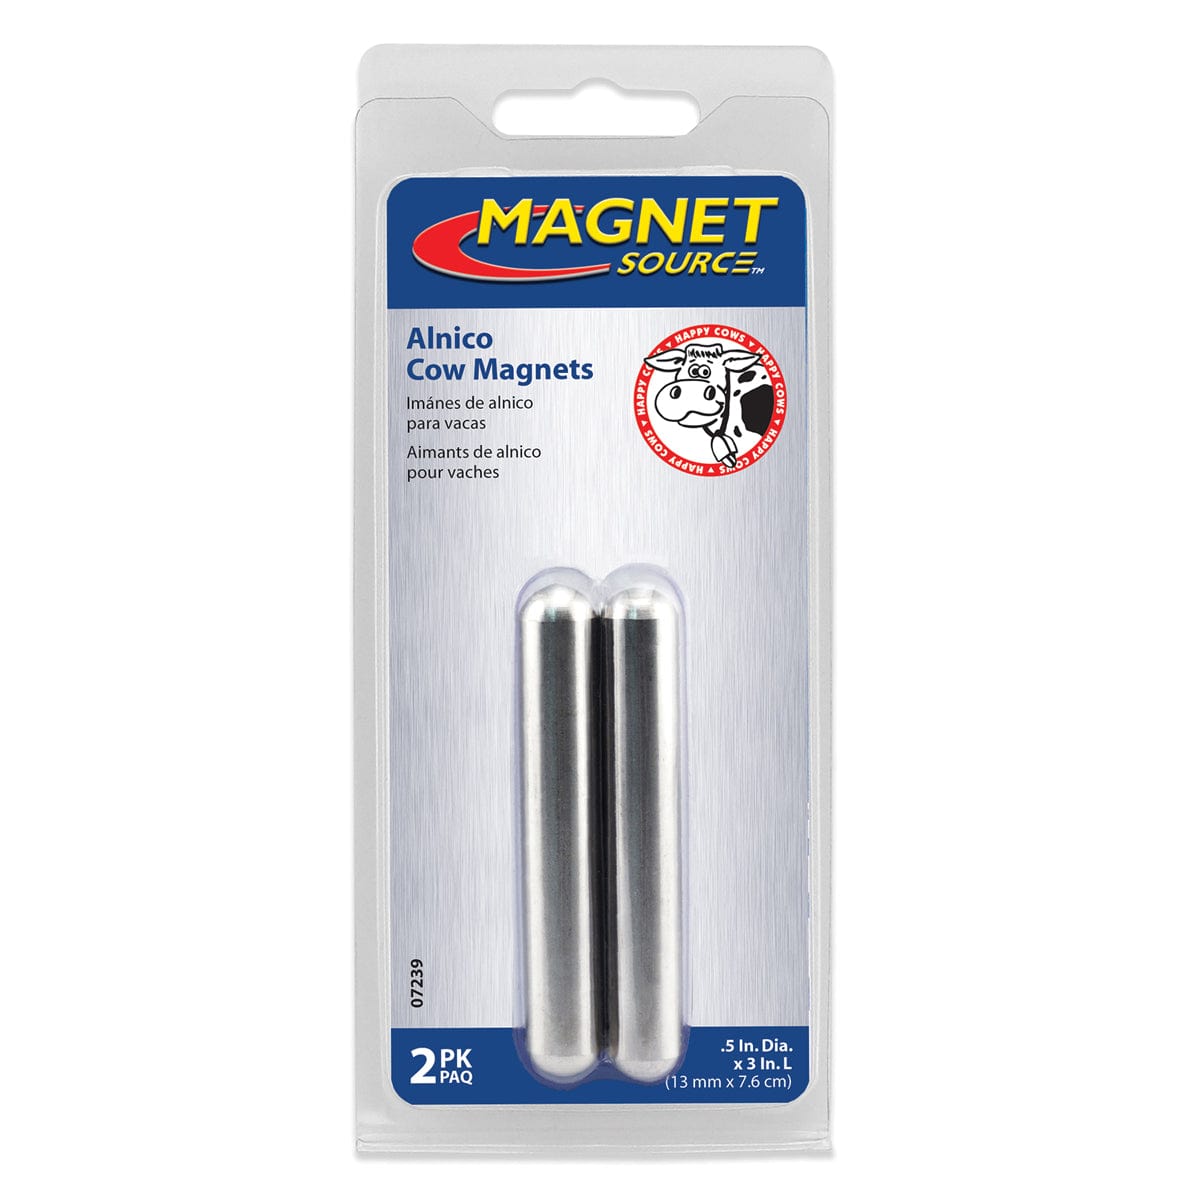 Magnet Source Alnico Cow Magnets 2pk